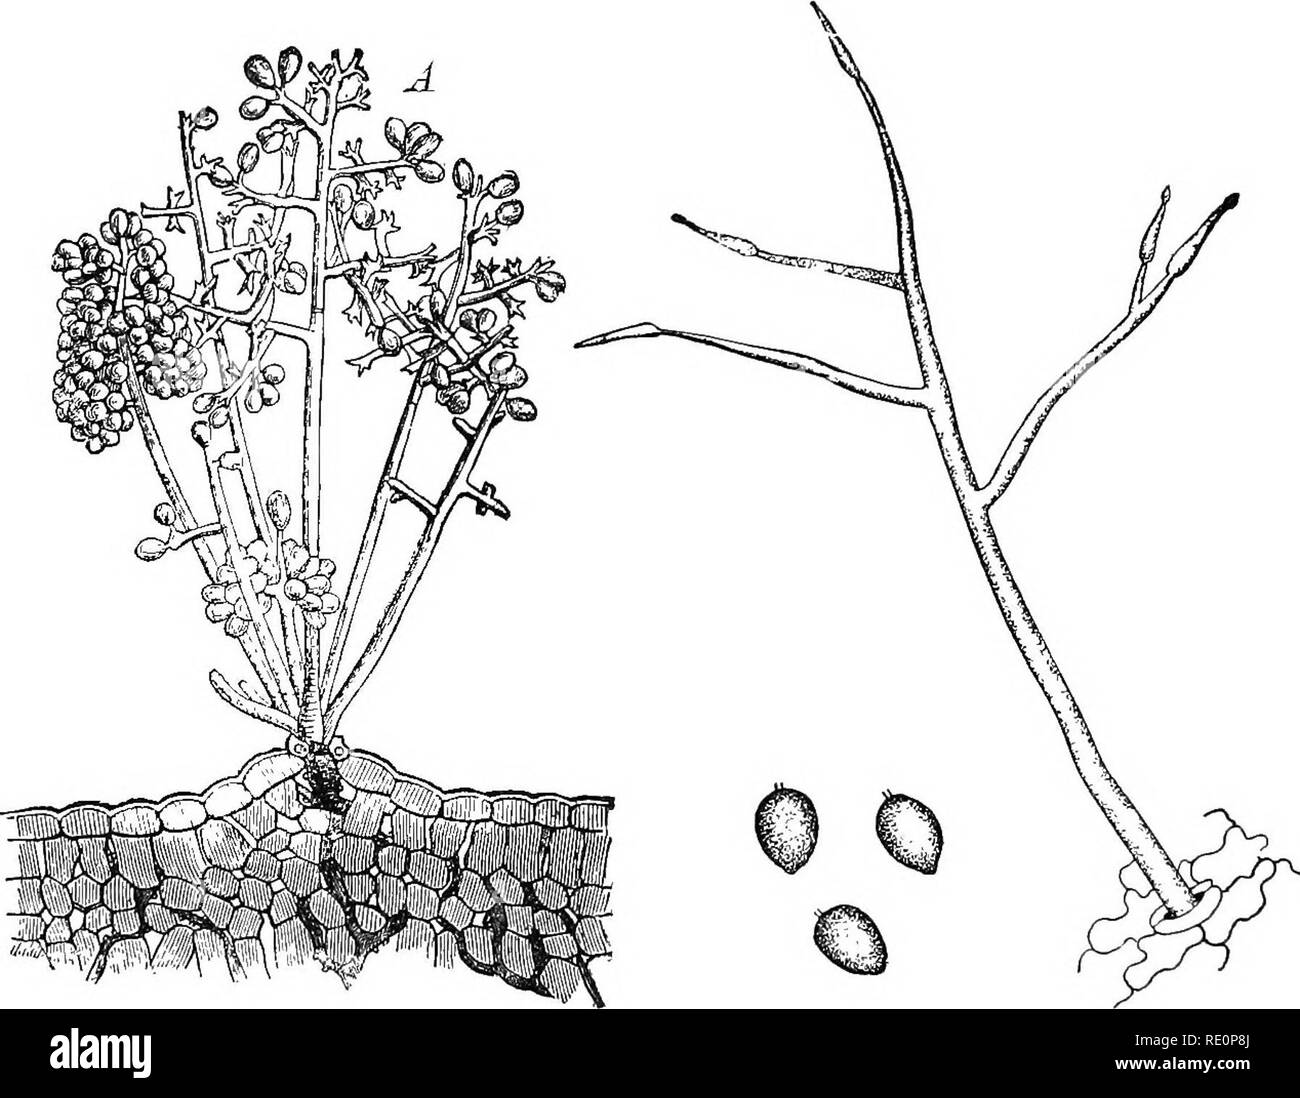 . Elementary botany. Botany. 126 MORPHOLOG Y. power the two cilia on the end may be seen, or we may make them more distinct by treatment with Schultz's solution, draw- ing some under the cover glass. The zoogonidium is oval and the cilia are at the pointed end. After they have been at rest. Fig. 139- Downy mildew of grape (Plasinopora viti- cola), sliowingtuft or gonidiophores bearing gonidia, also intercellular mycelium. Millardet.) (After Fig. 140. Phytophthora infestans showing pe- culiar branches; gonidia below. for some time they often slip out of the thin wall, and swim again, this time  Stock Photo